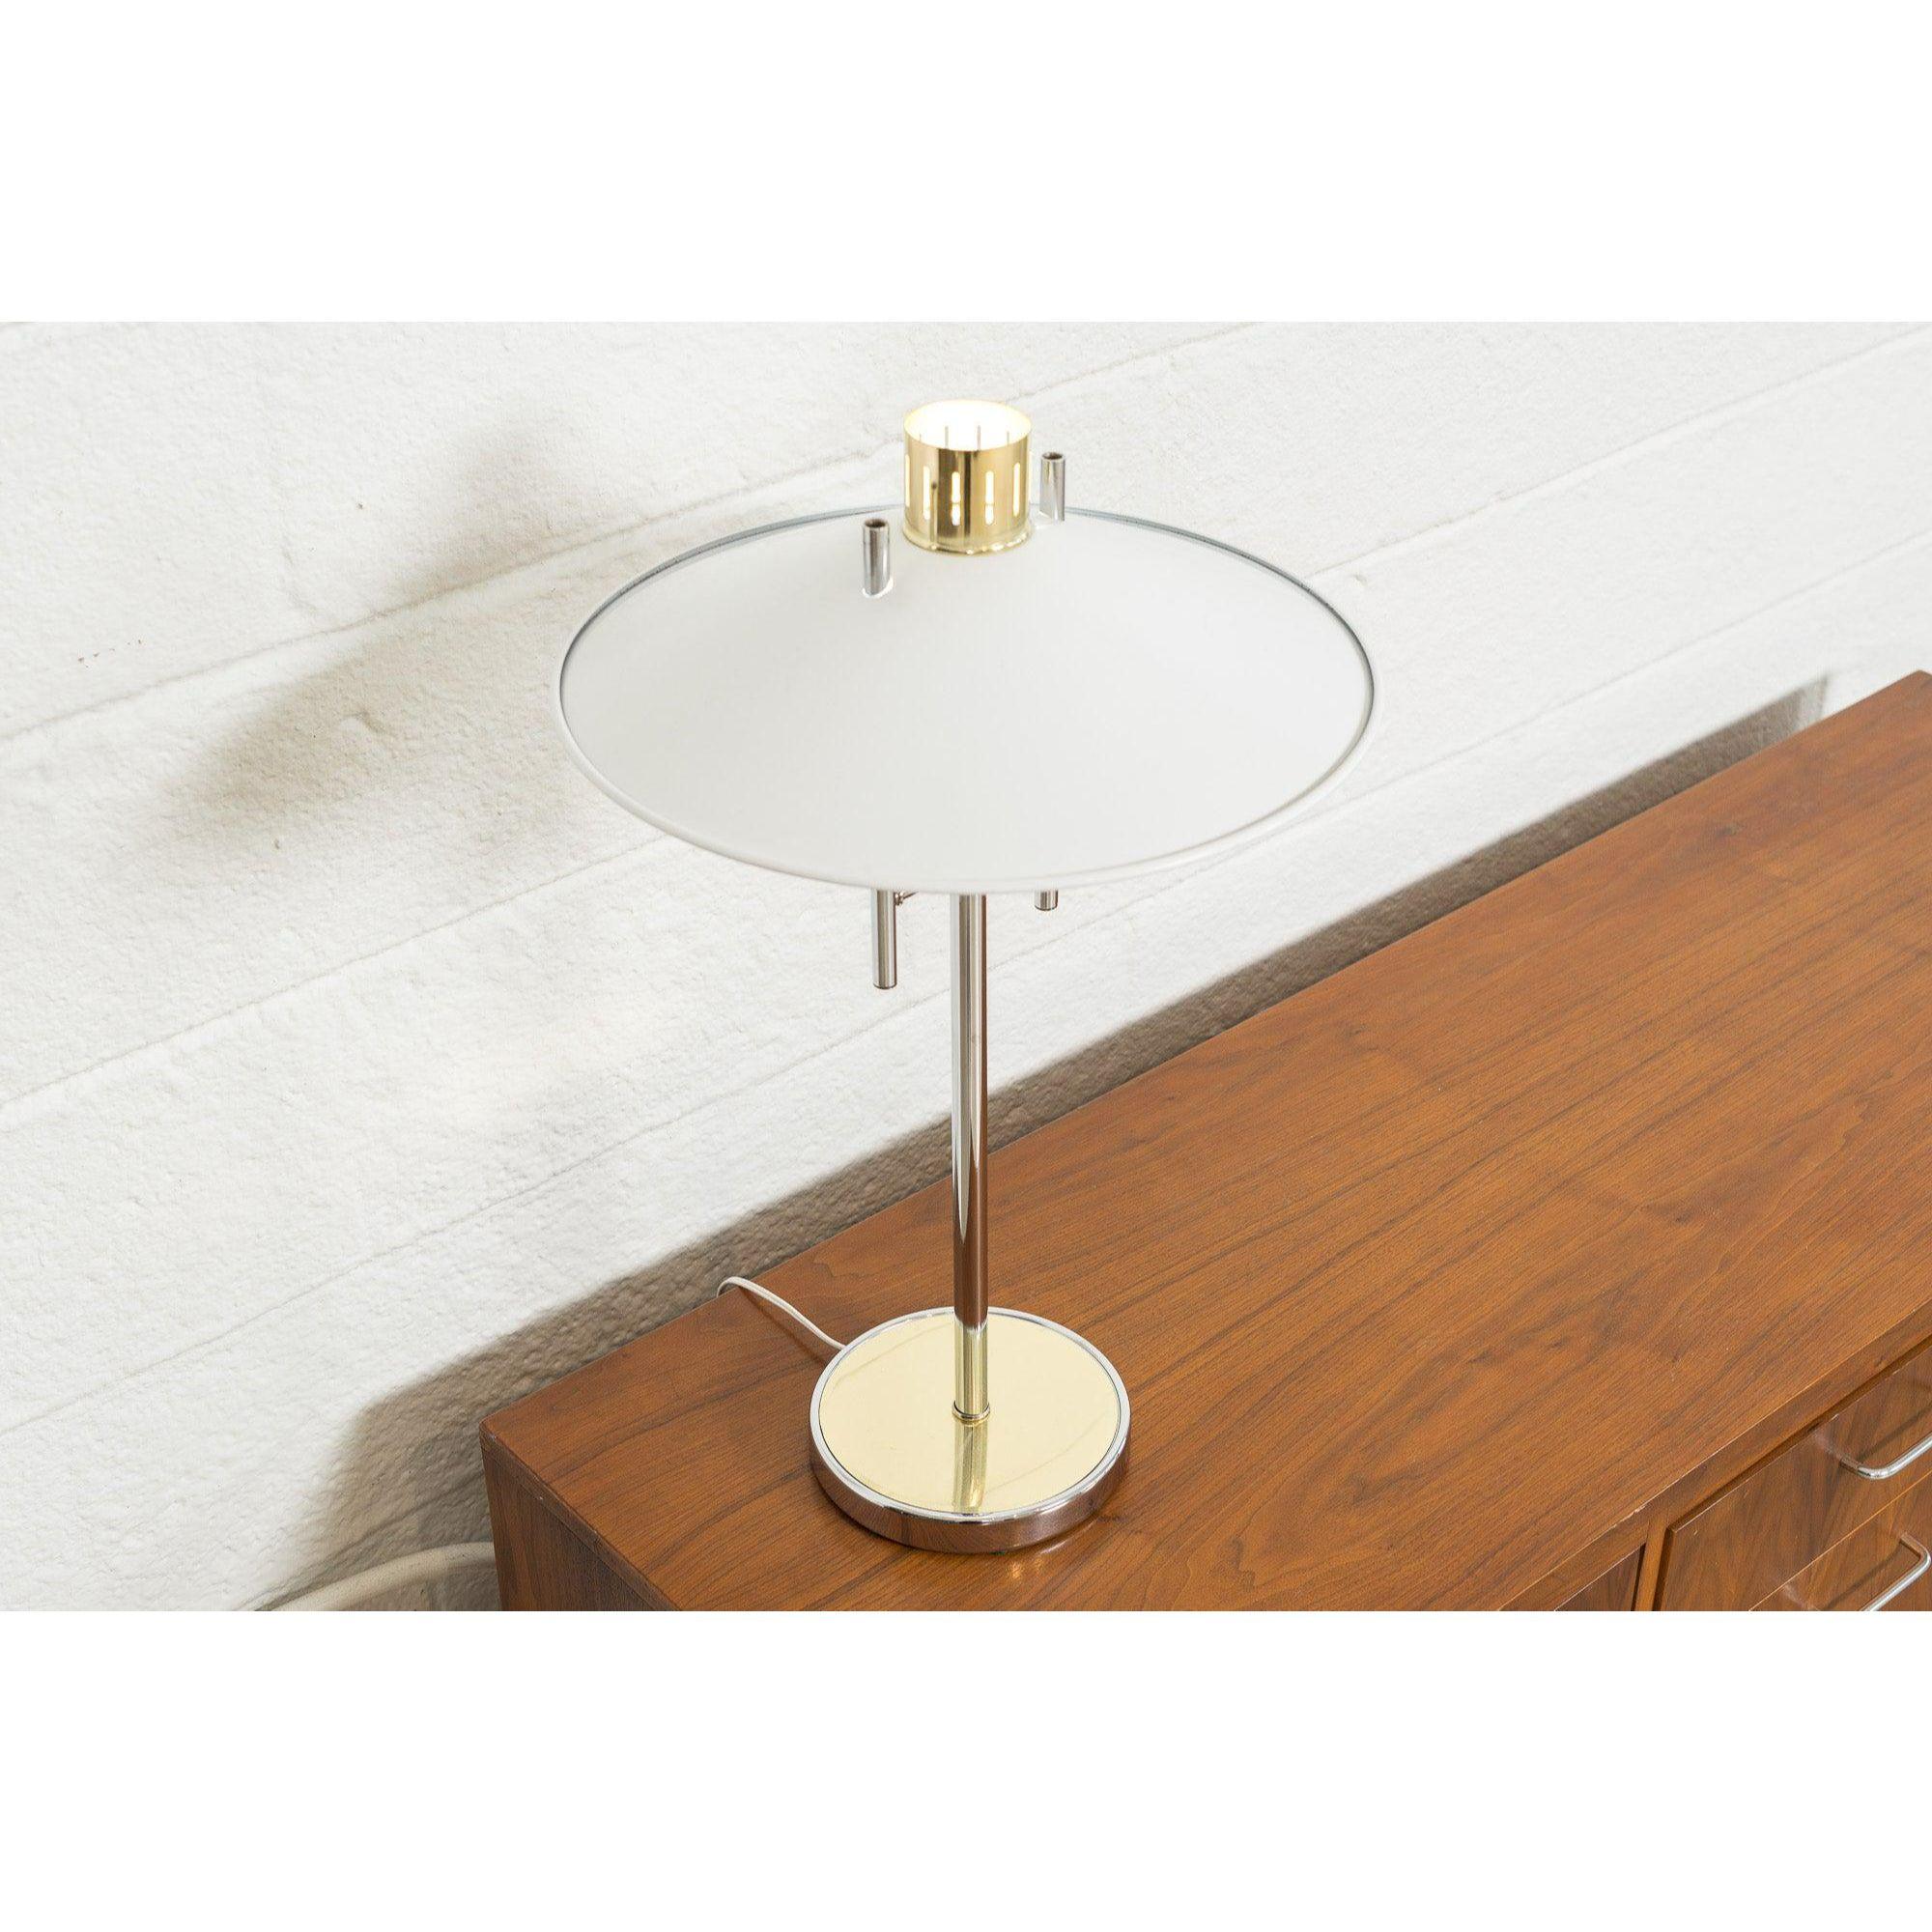 20th Century Mid-Century Modern White, Chrome and Brass Table Lamp, 1970s For Sale